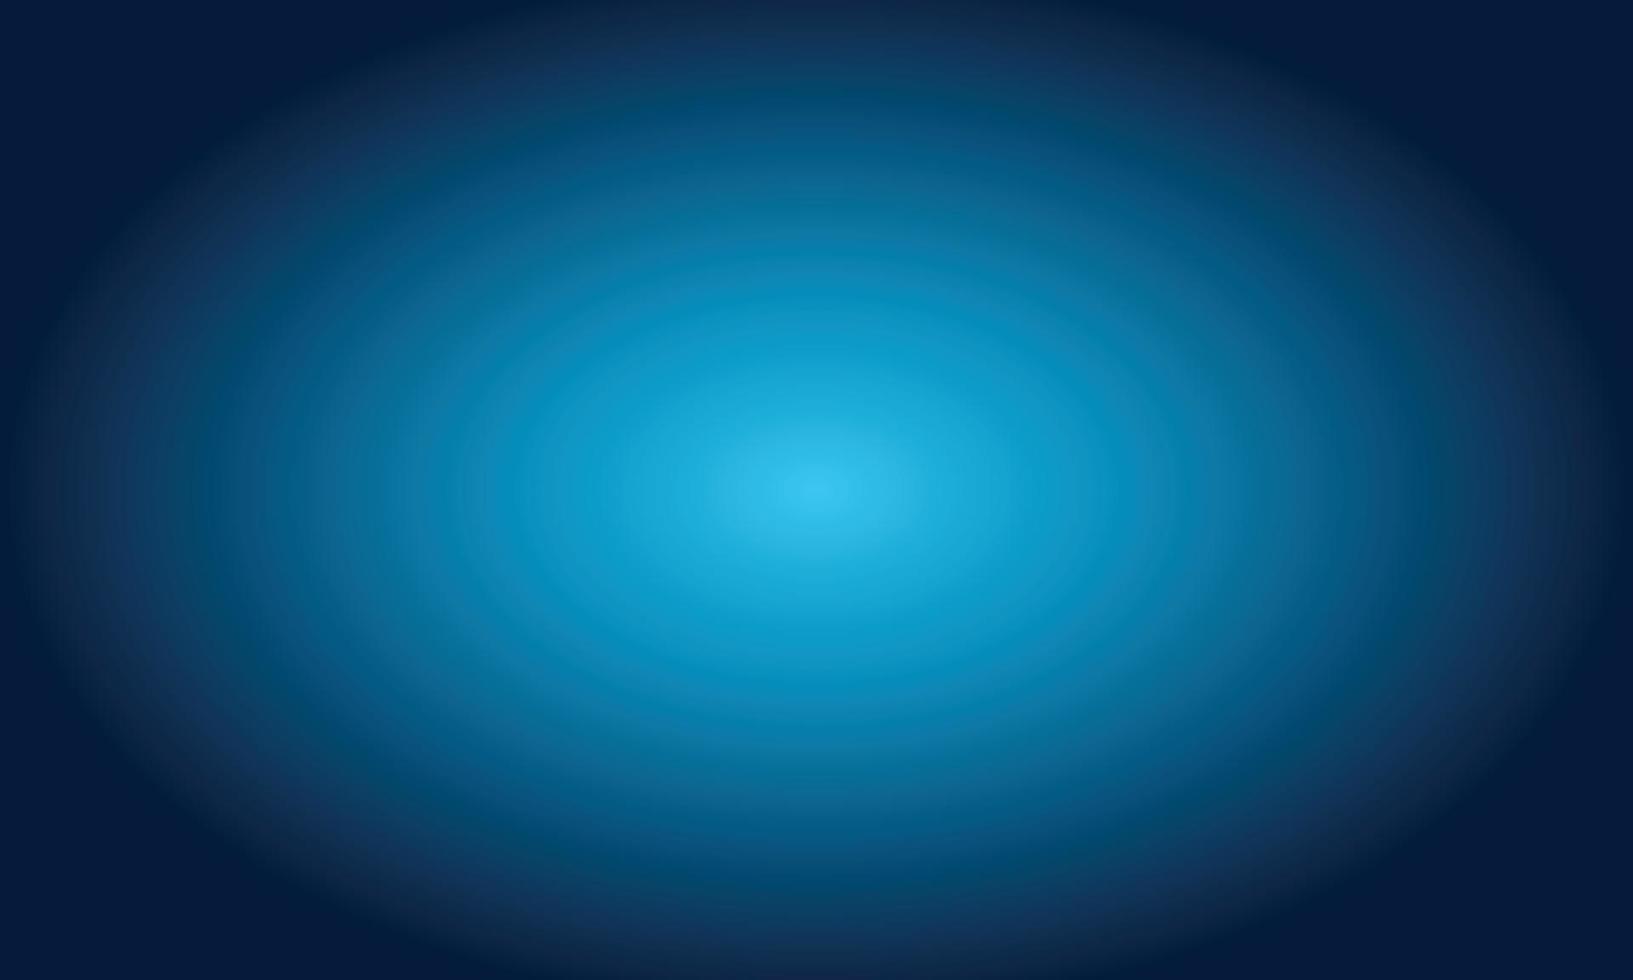 Blue background abstract illustration with gradient blur design. vector